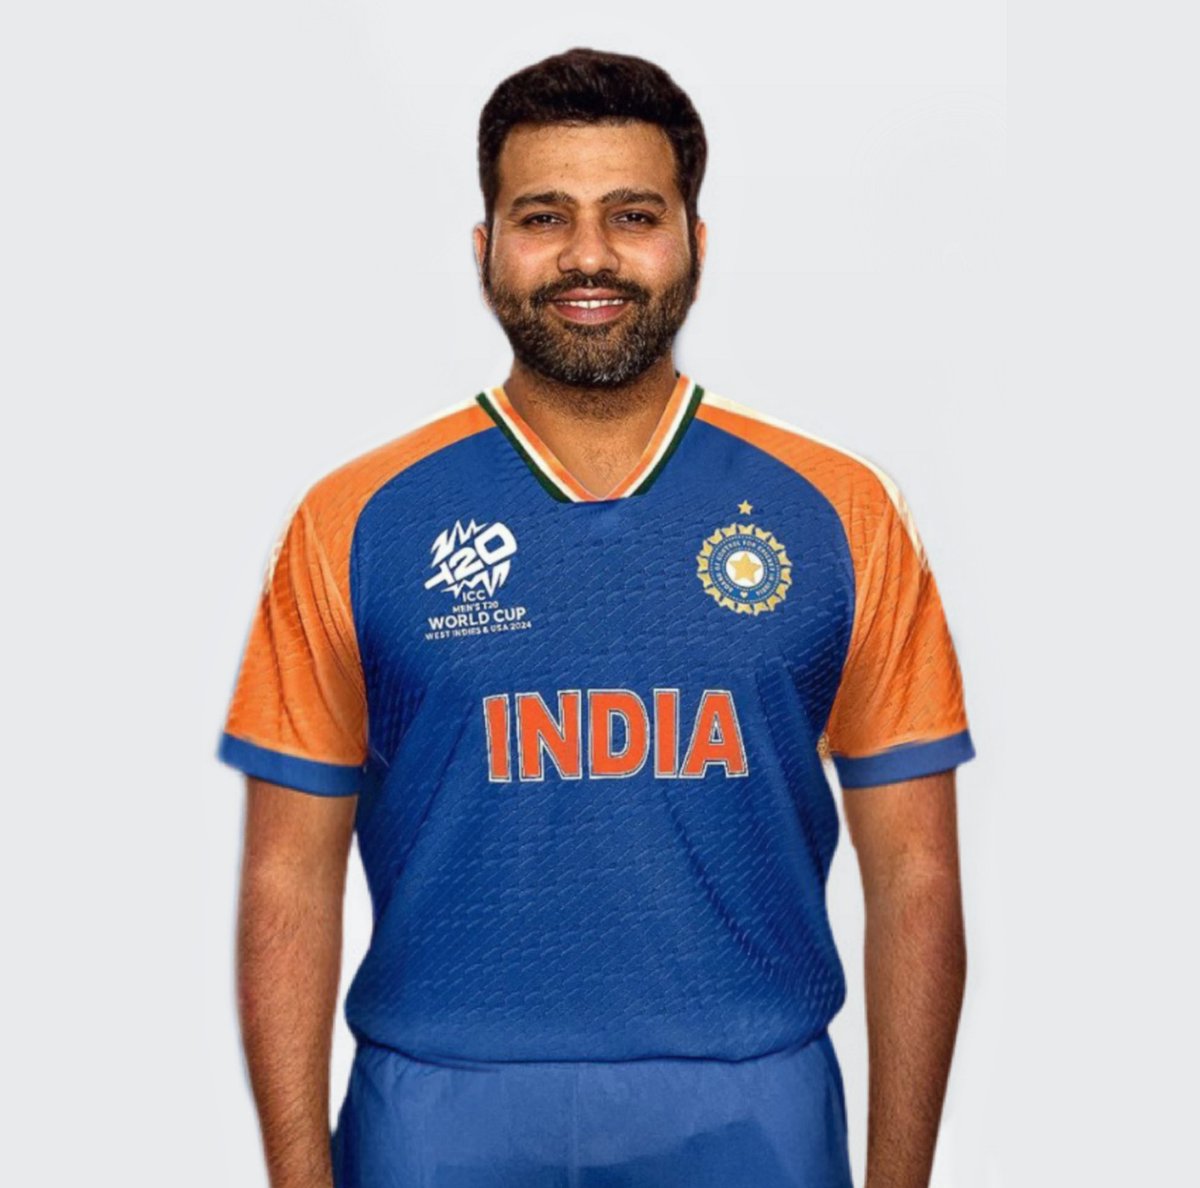 What is your opinion of 🇮🇳 T20 WC captain Rohit Sharma?